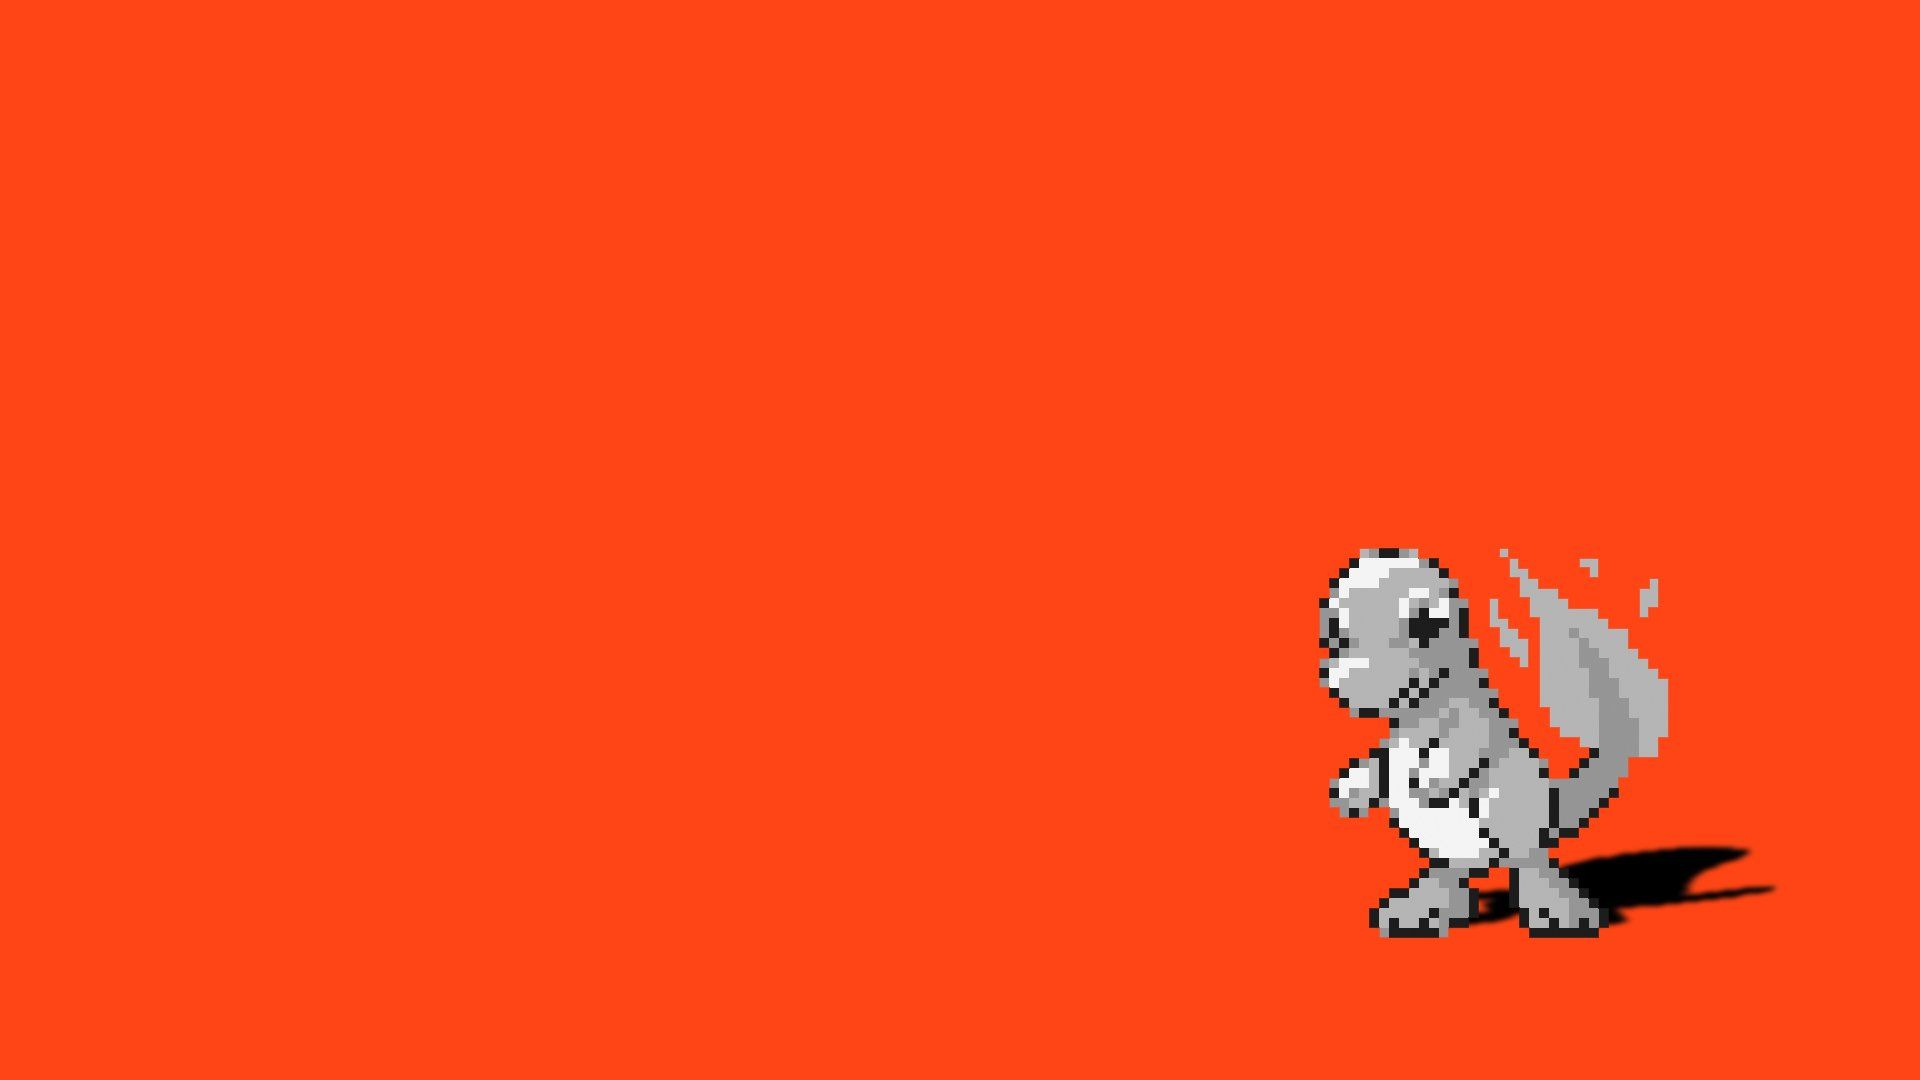 Pokemon Simple Background Charmander Red Background Fire Red Wall Paper